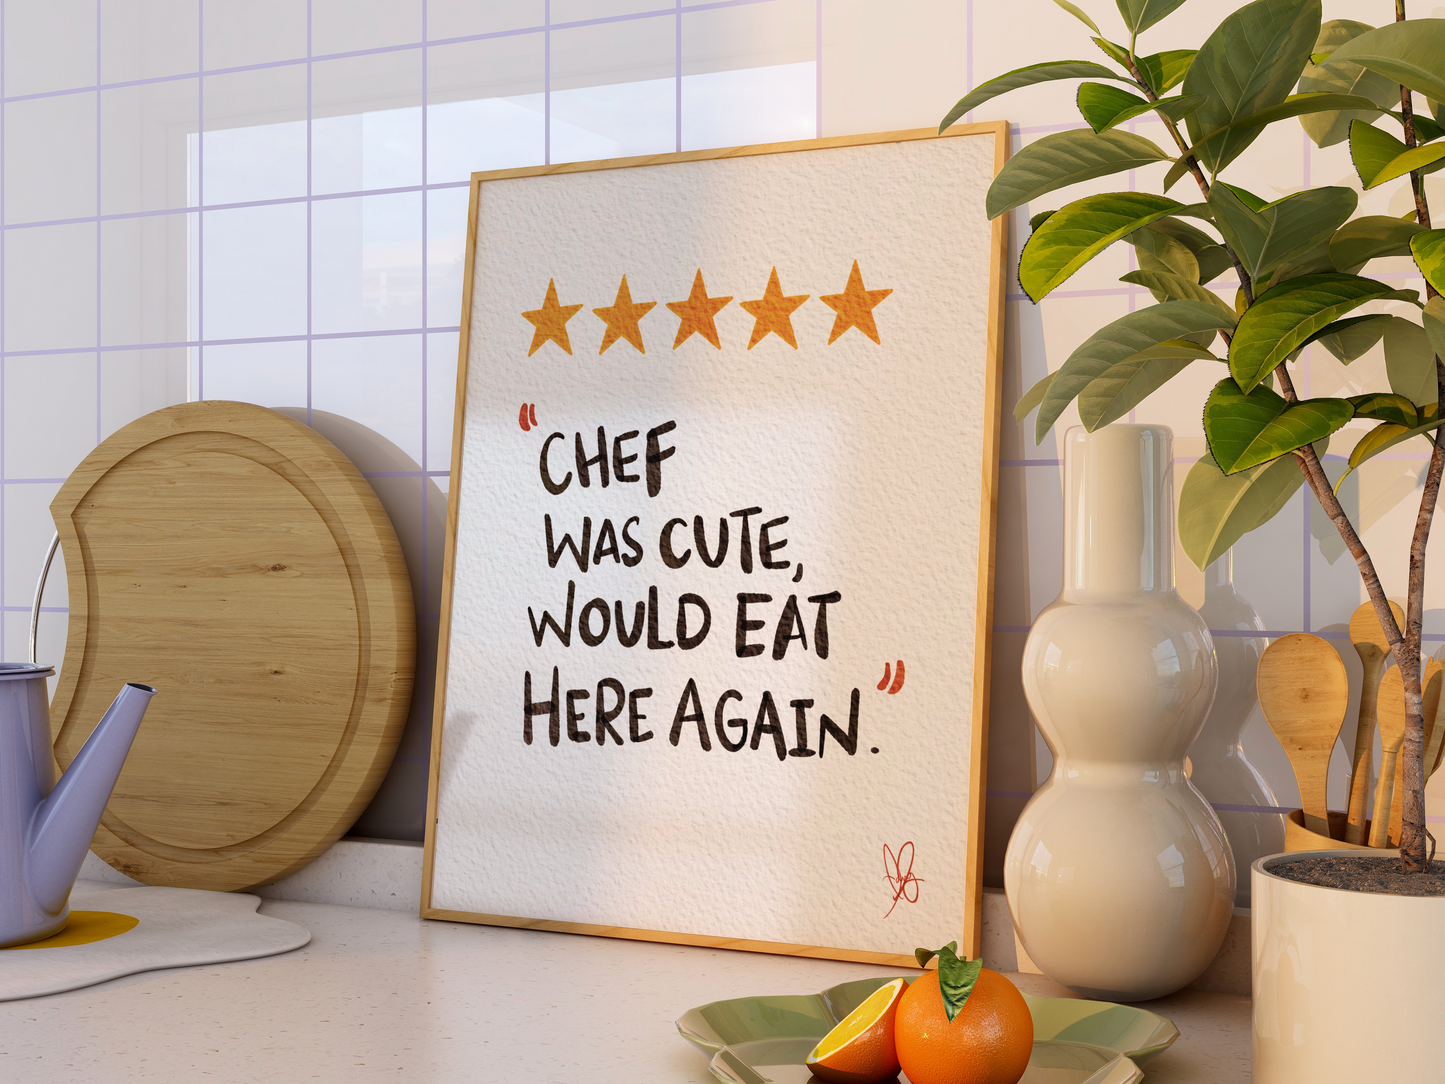 Summer Vibes: Watercolor Chef Was Cute, Would Eat Here Again - Hand-Drawn 5-Star Rated Digital Print Poster With Cute Quote for Kitchen and Dining Spaces. Shop Our Wall Arts and Wall Decors Today!